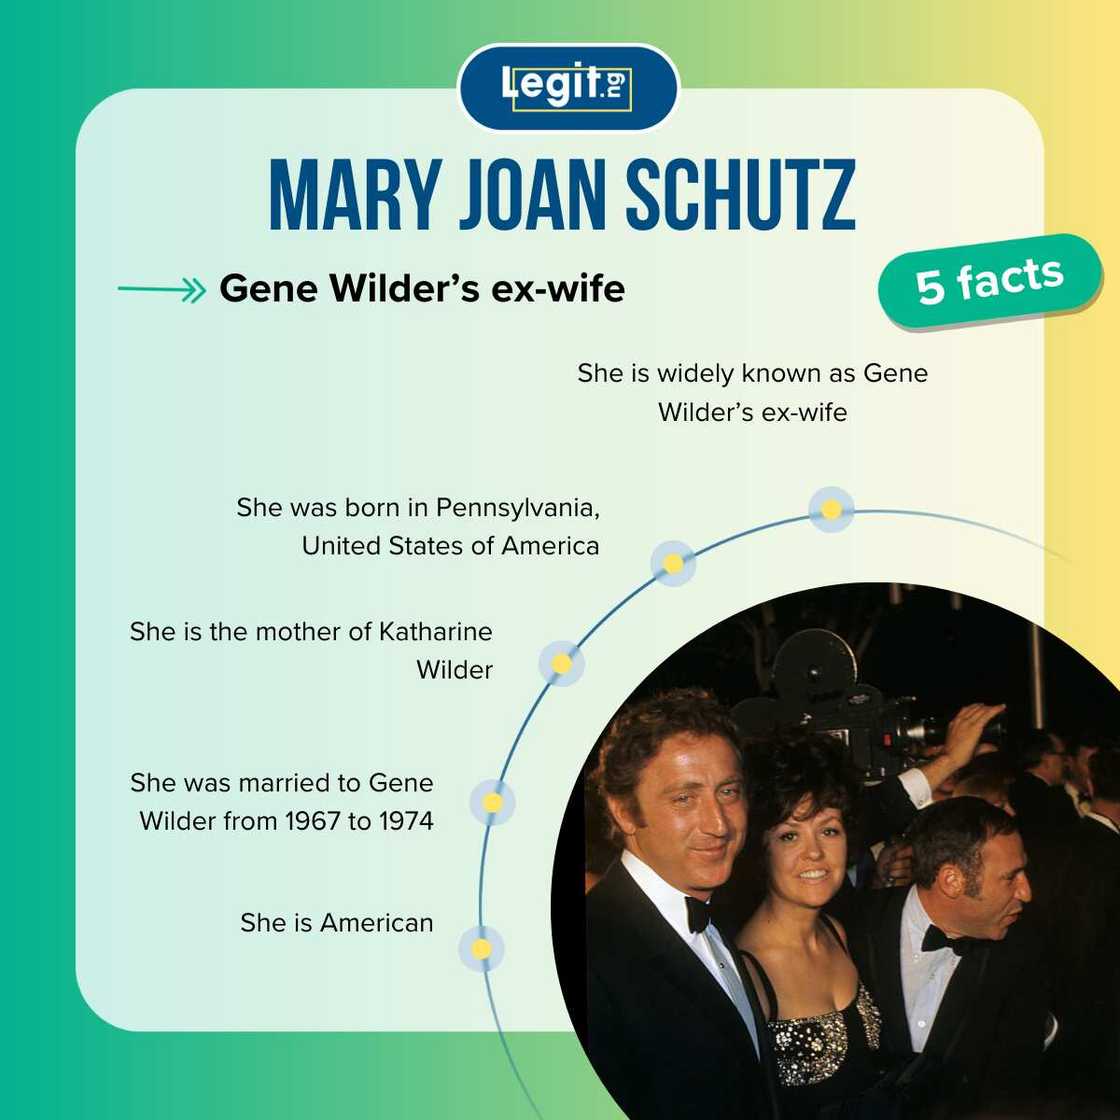 Quick facts about Mary Joan Schutz